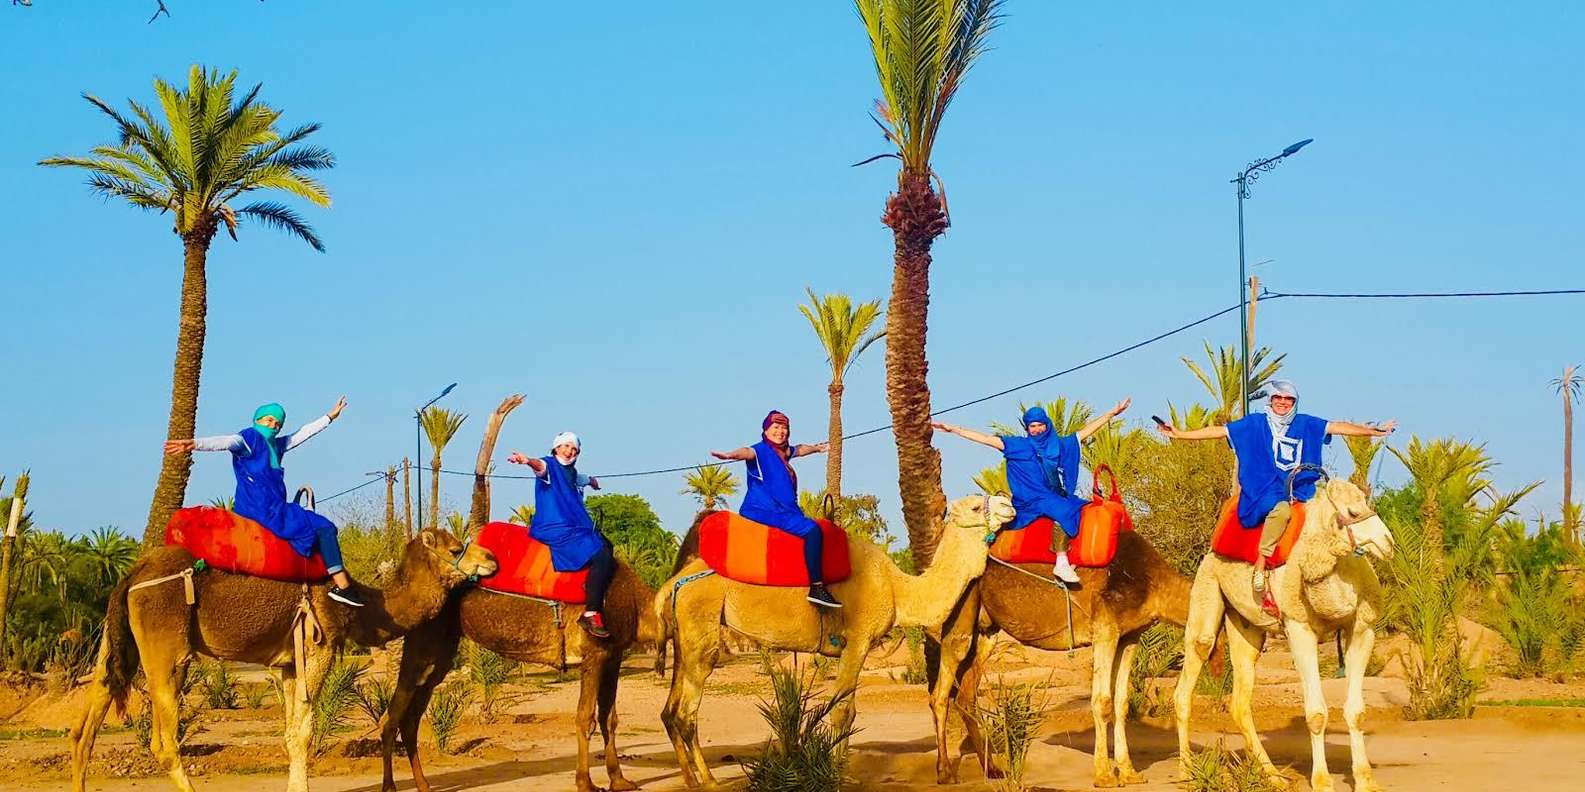 Morocco camel ride tours to explore the palm groves of Marrakech